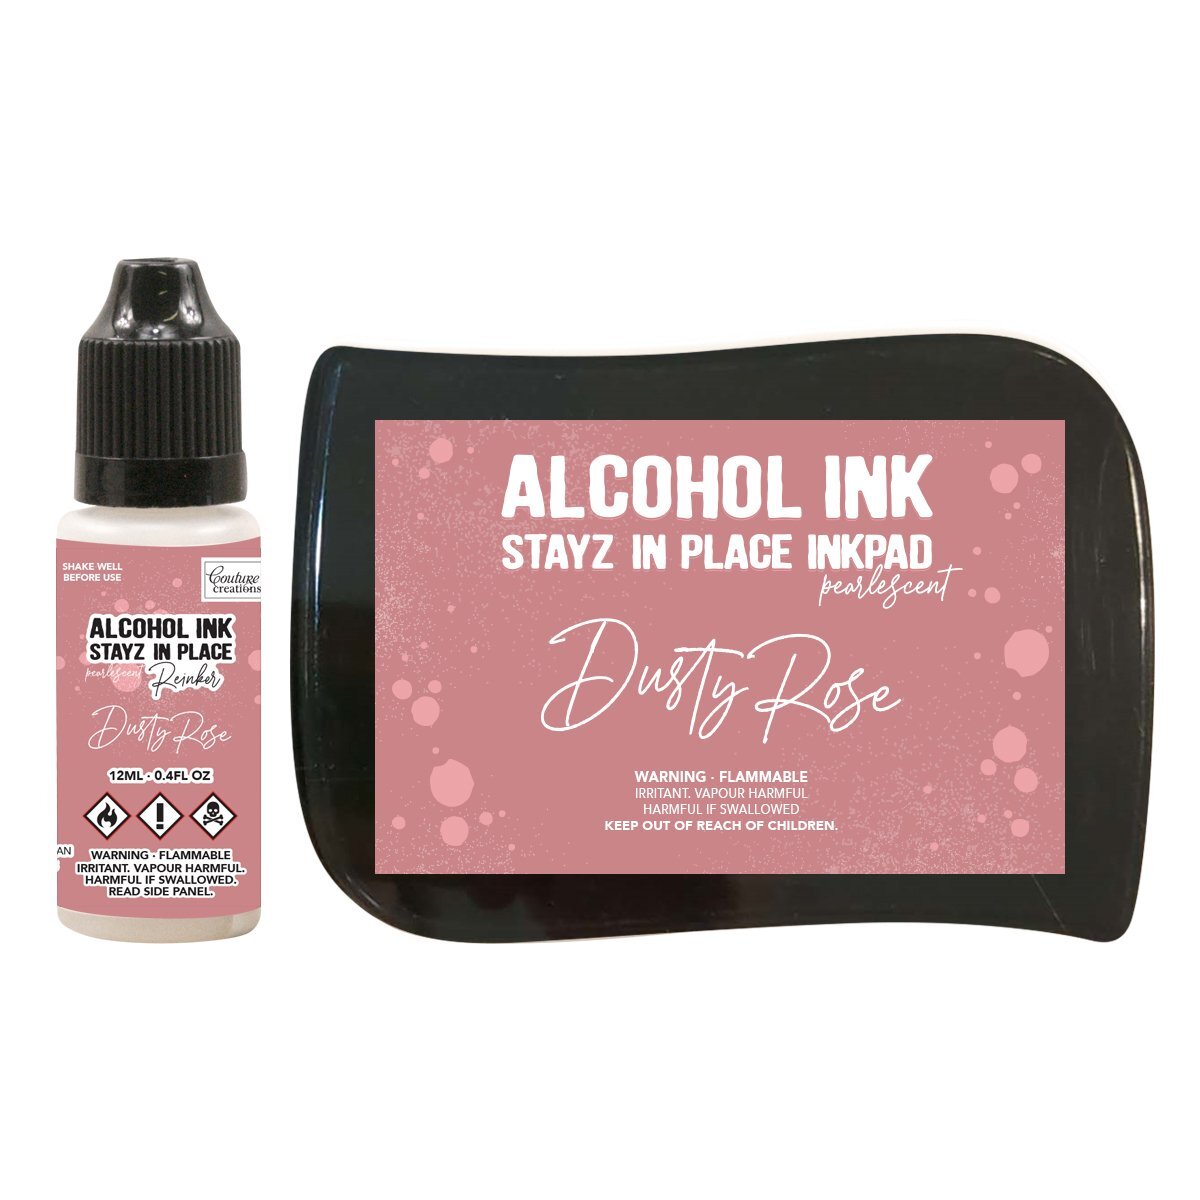 Couture Creations Alcohol Ink Stayz in Place Alcohol Ink Pad with Reinker Dusty Rose Pearlescent